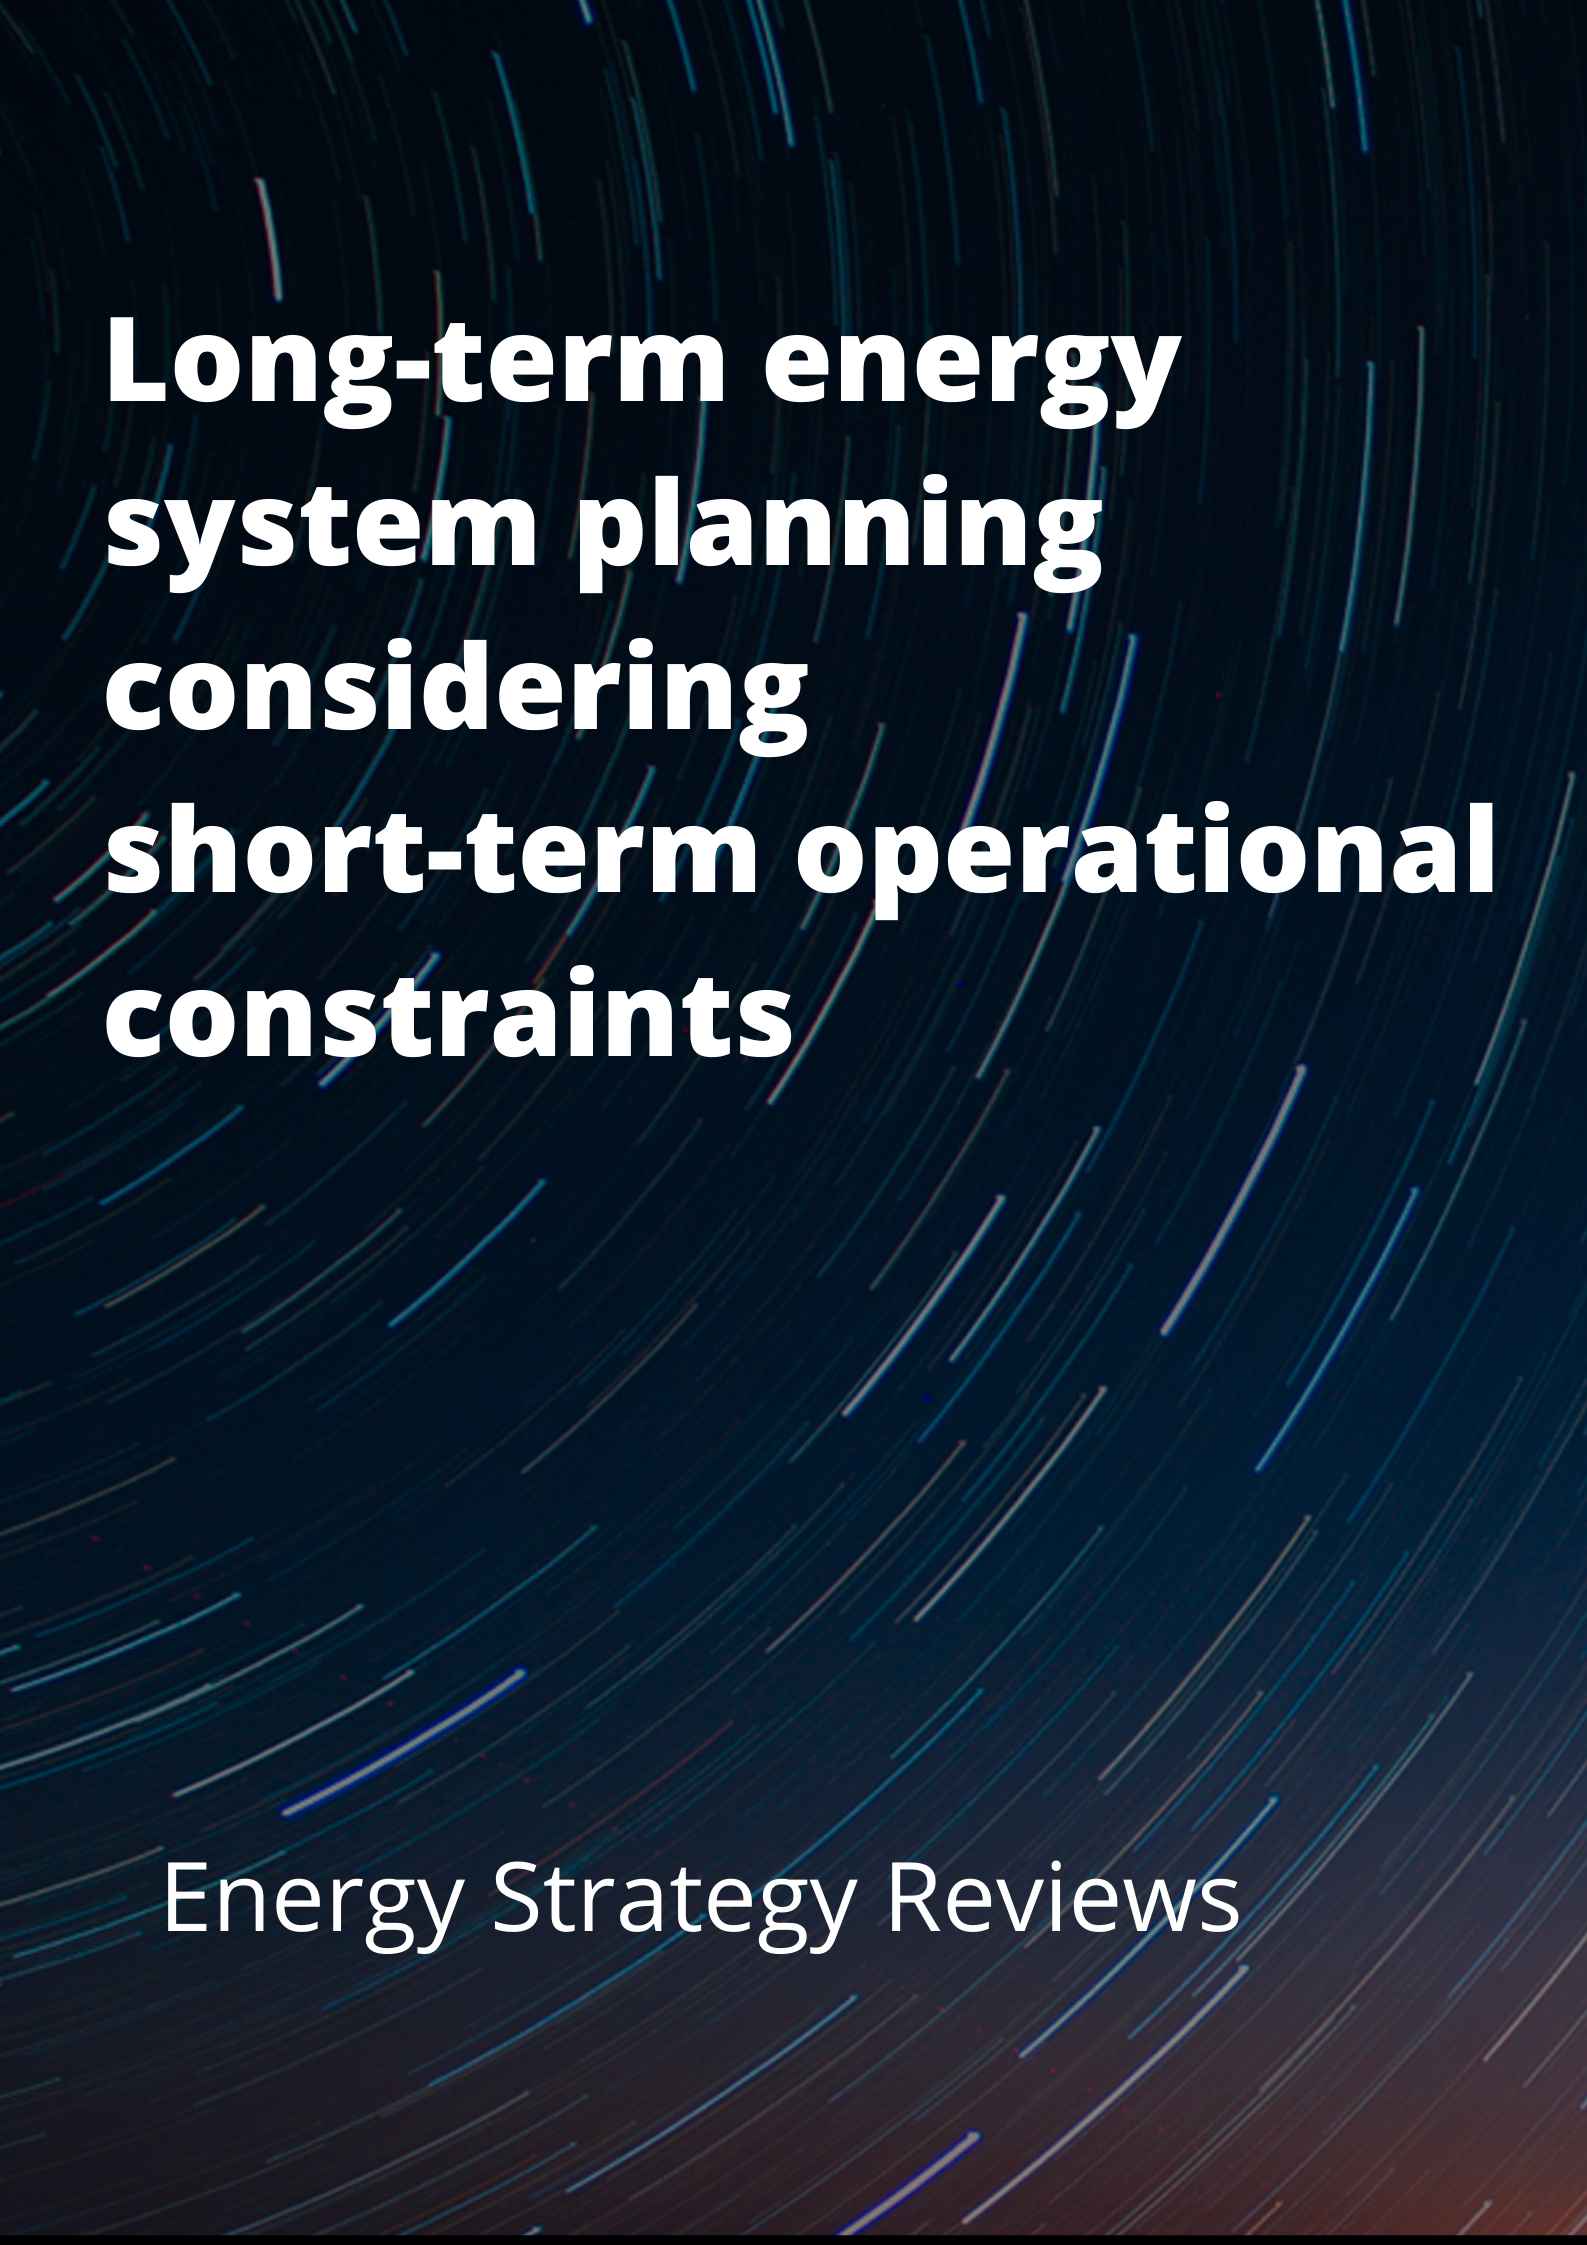 Long-term energy system planning considering short-term operational constraints